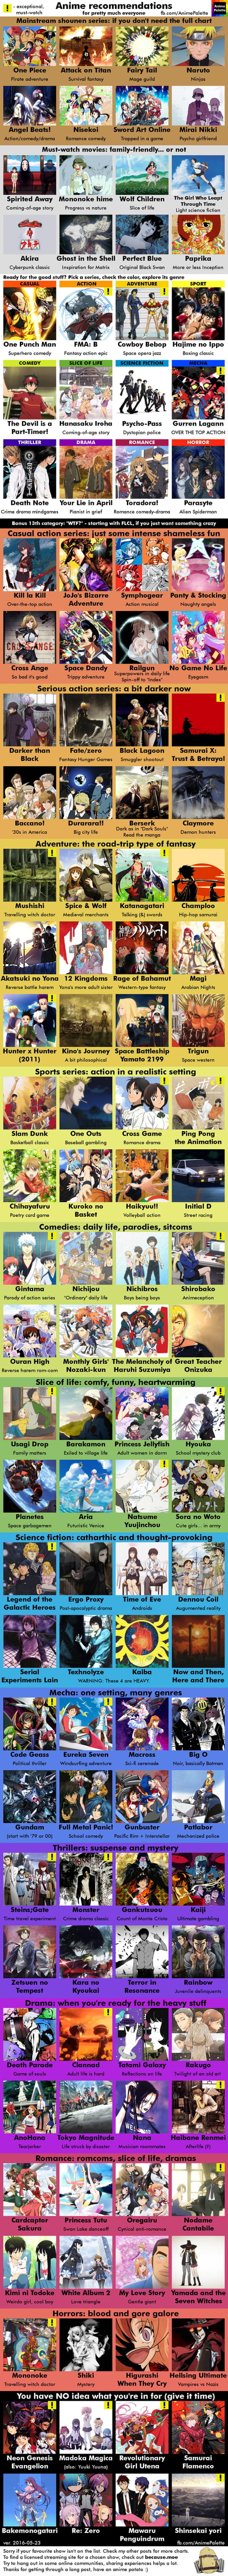 Anime recommendations for everyone - 9GAG